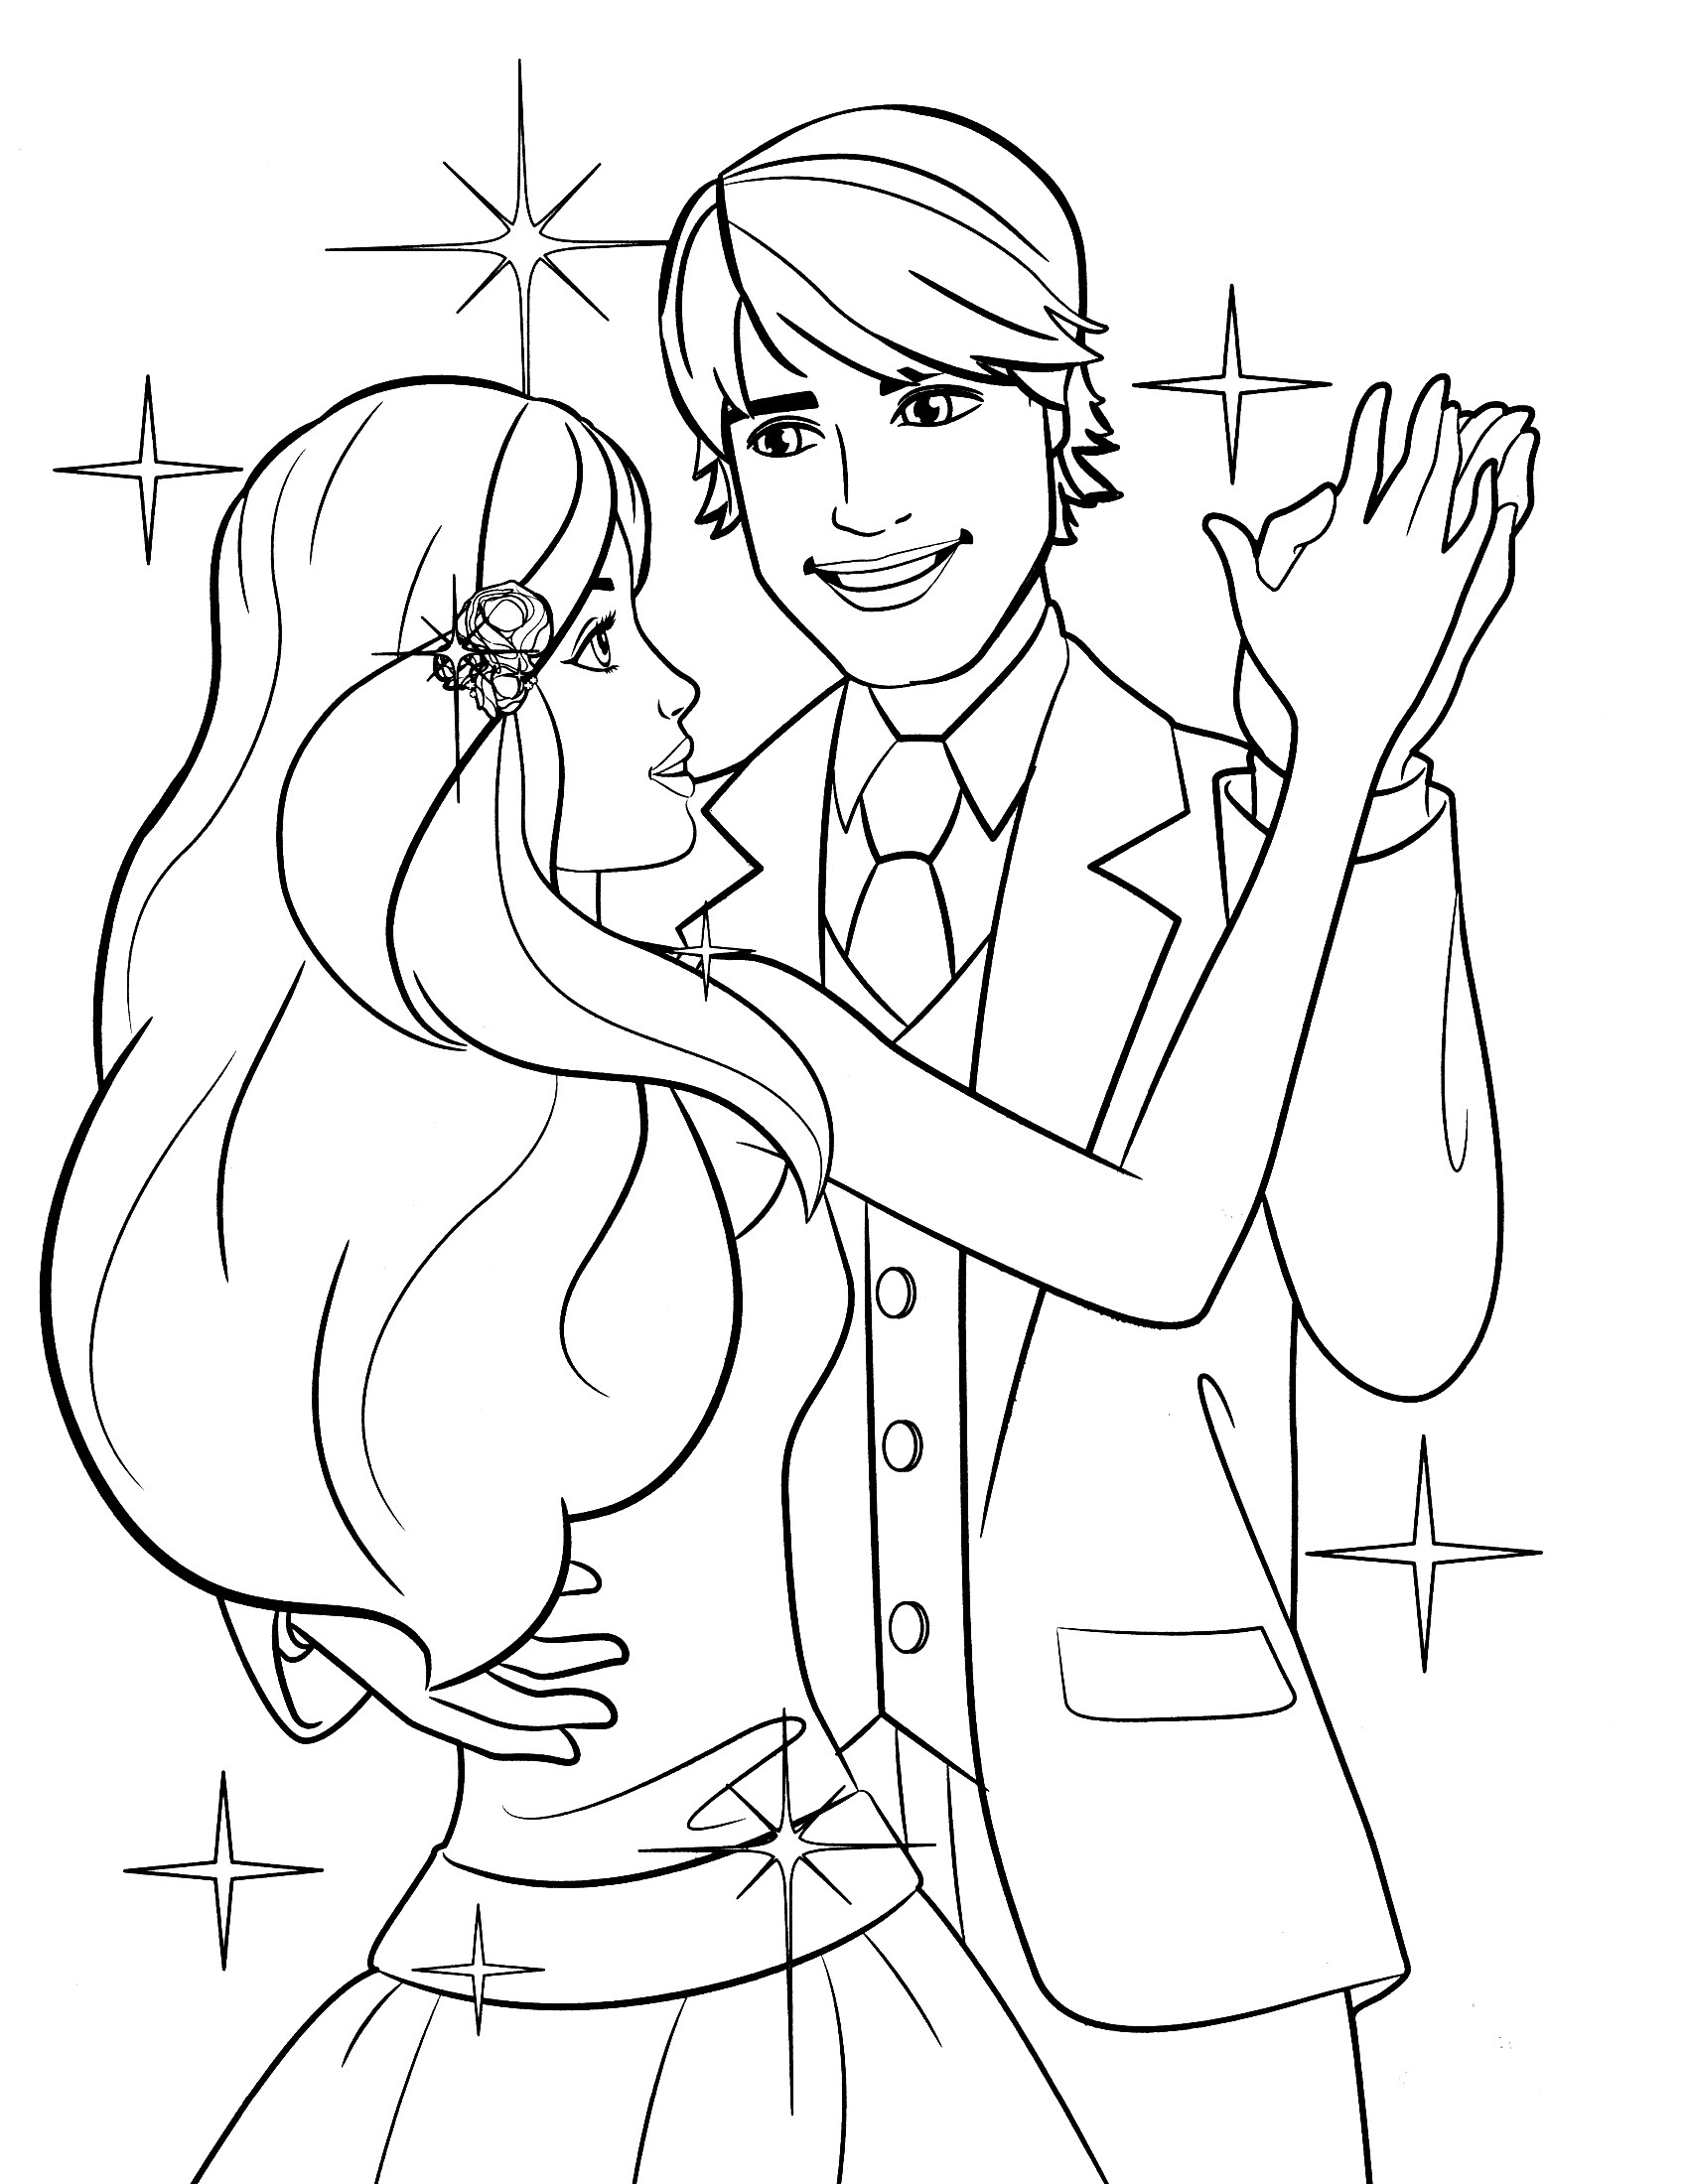 Printable Wedding Coloring Pages
 Wedding Coloring Pages Best Coloring Pages For Kids